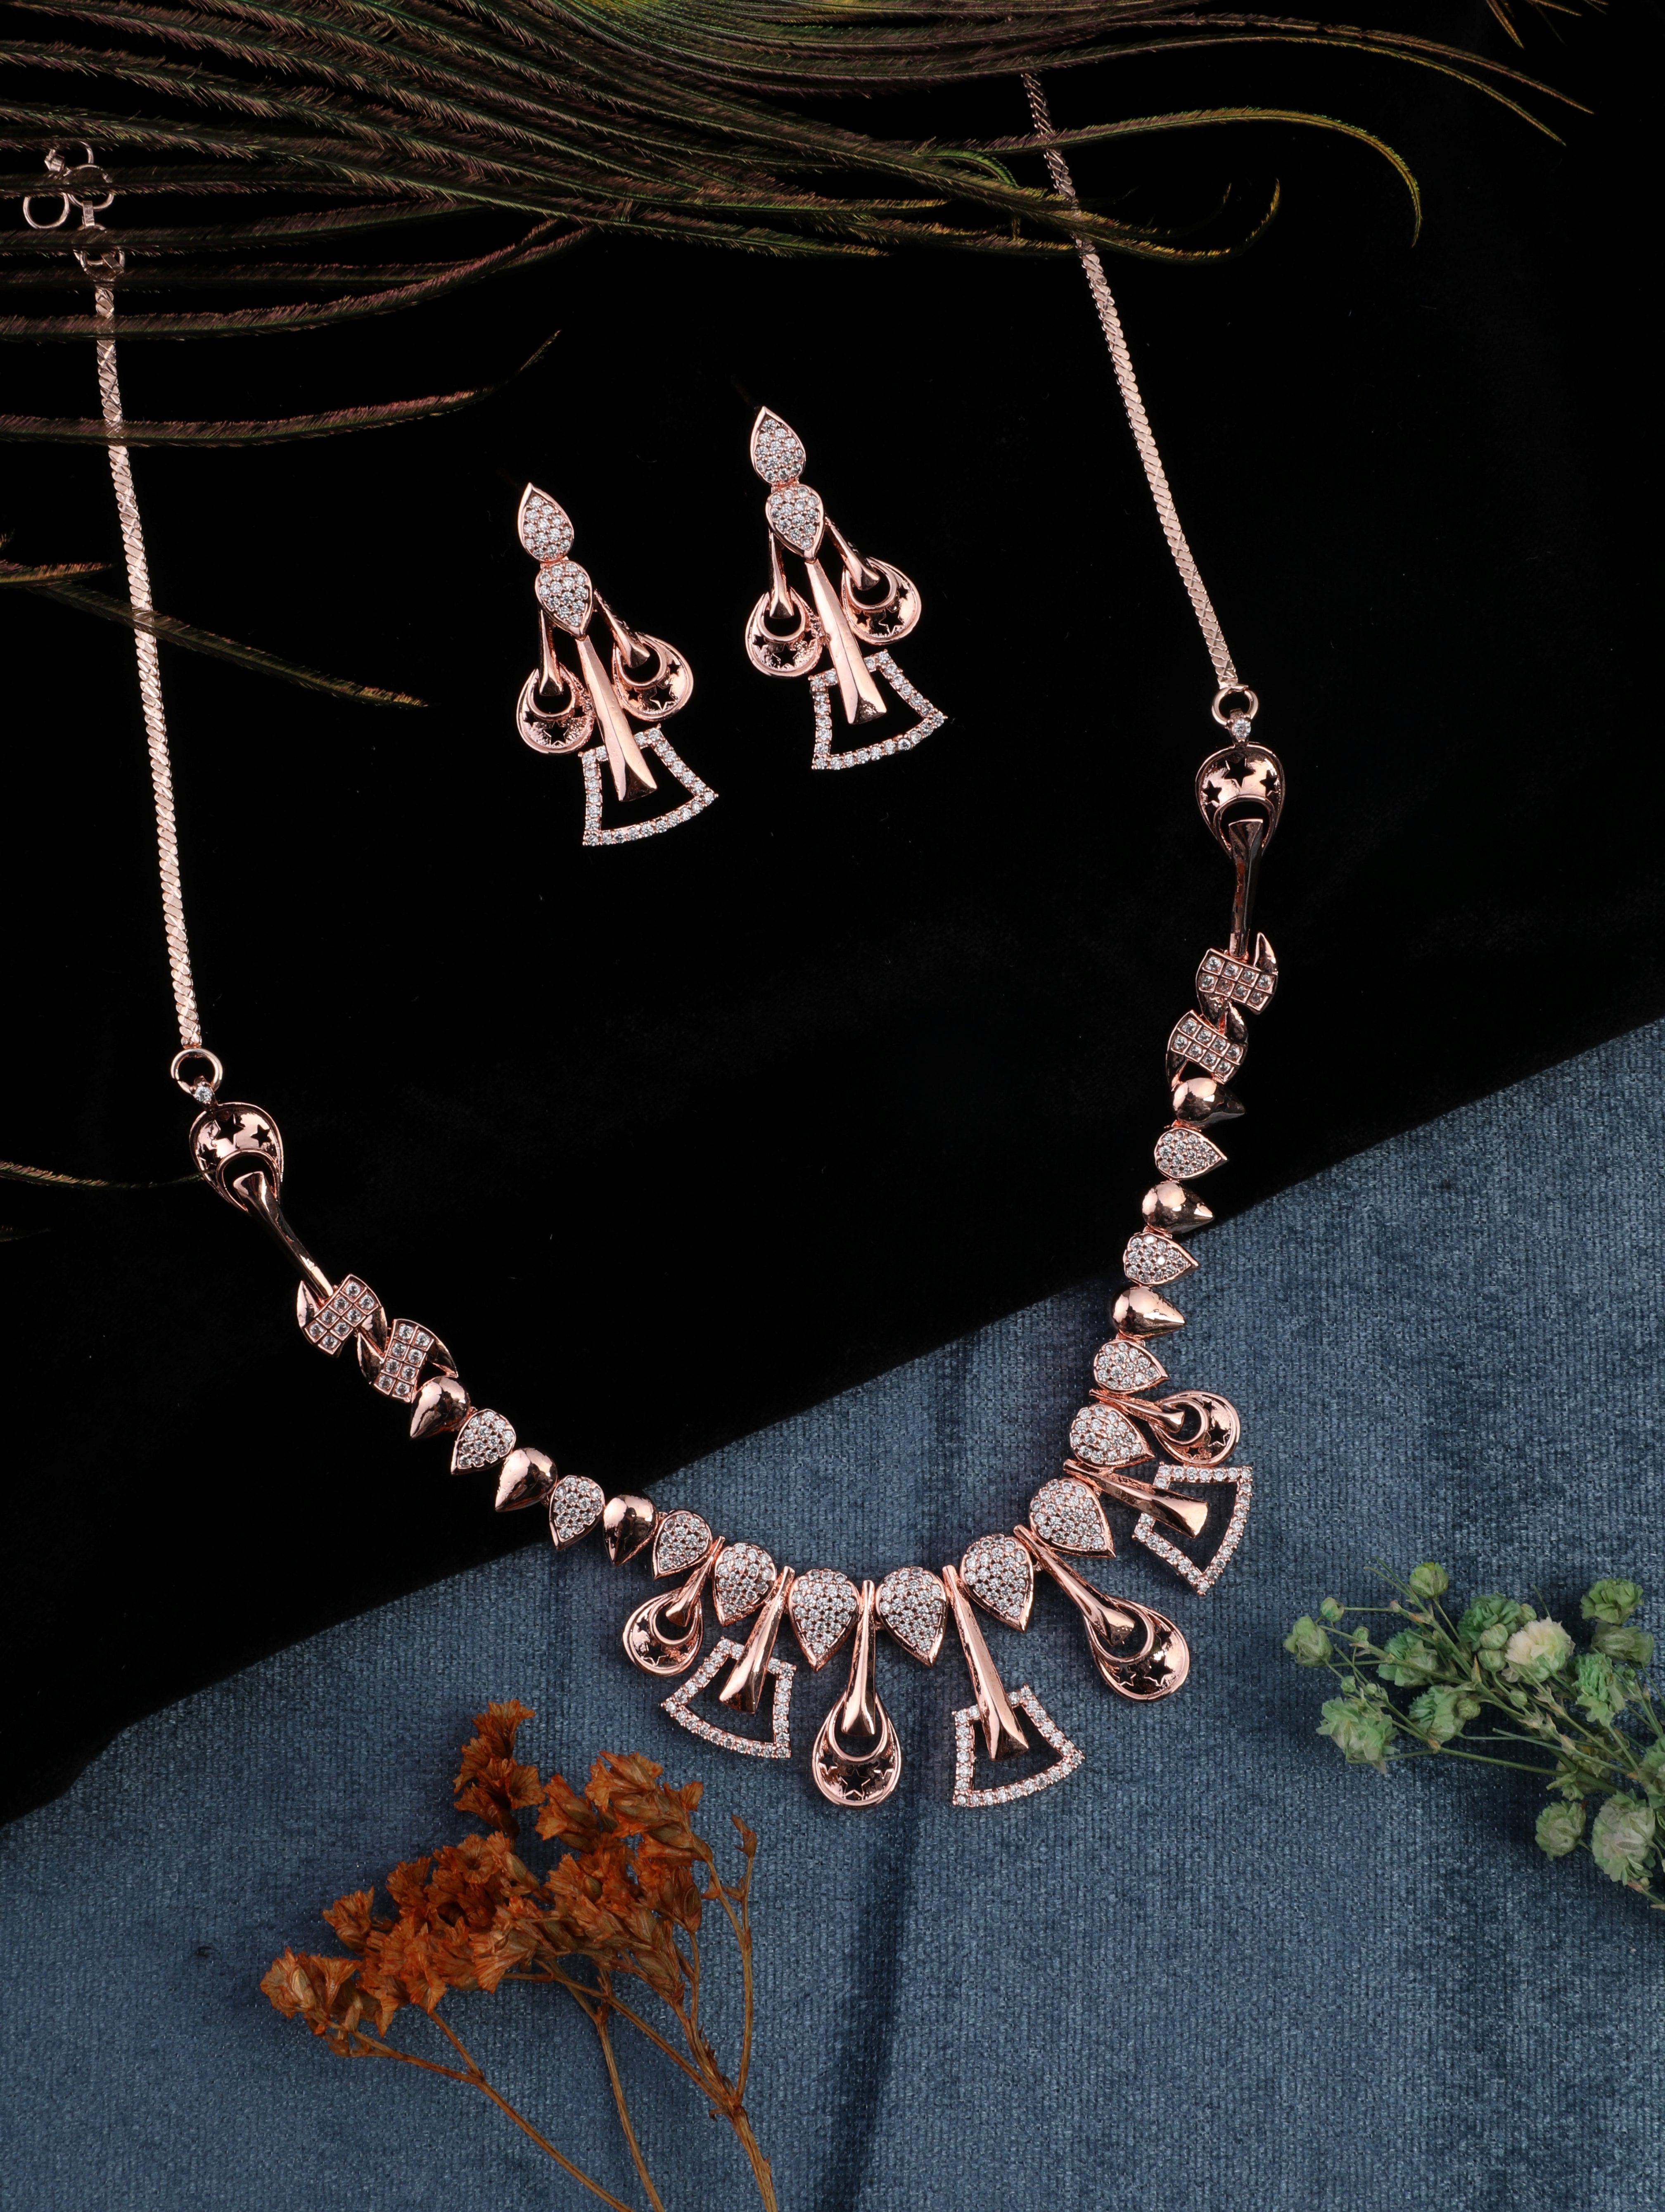 Rhodium Plated Cubic Zircons Studded With Multi Tear Drop Necklace Set.